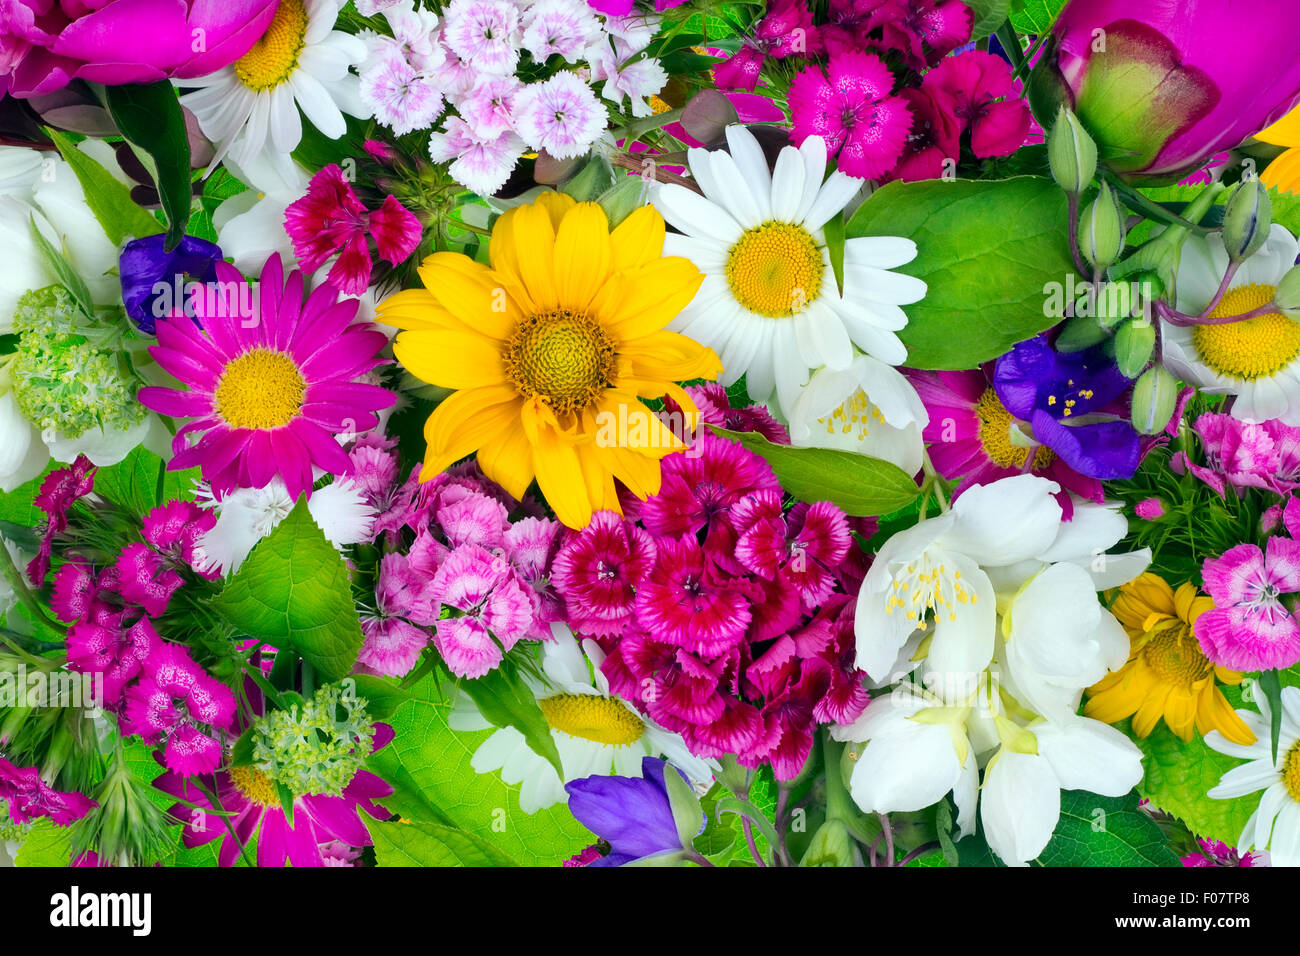 Floral chaos abstract collage from simple June summer flowers background Stock Photo